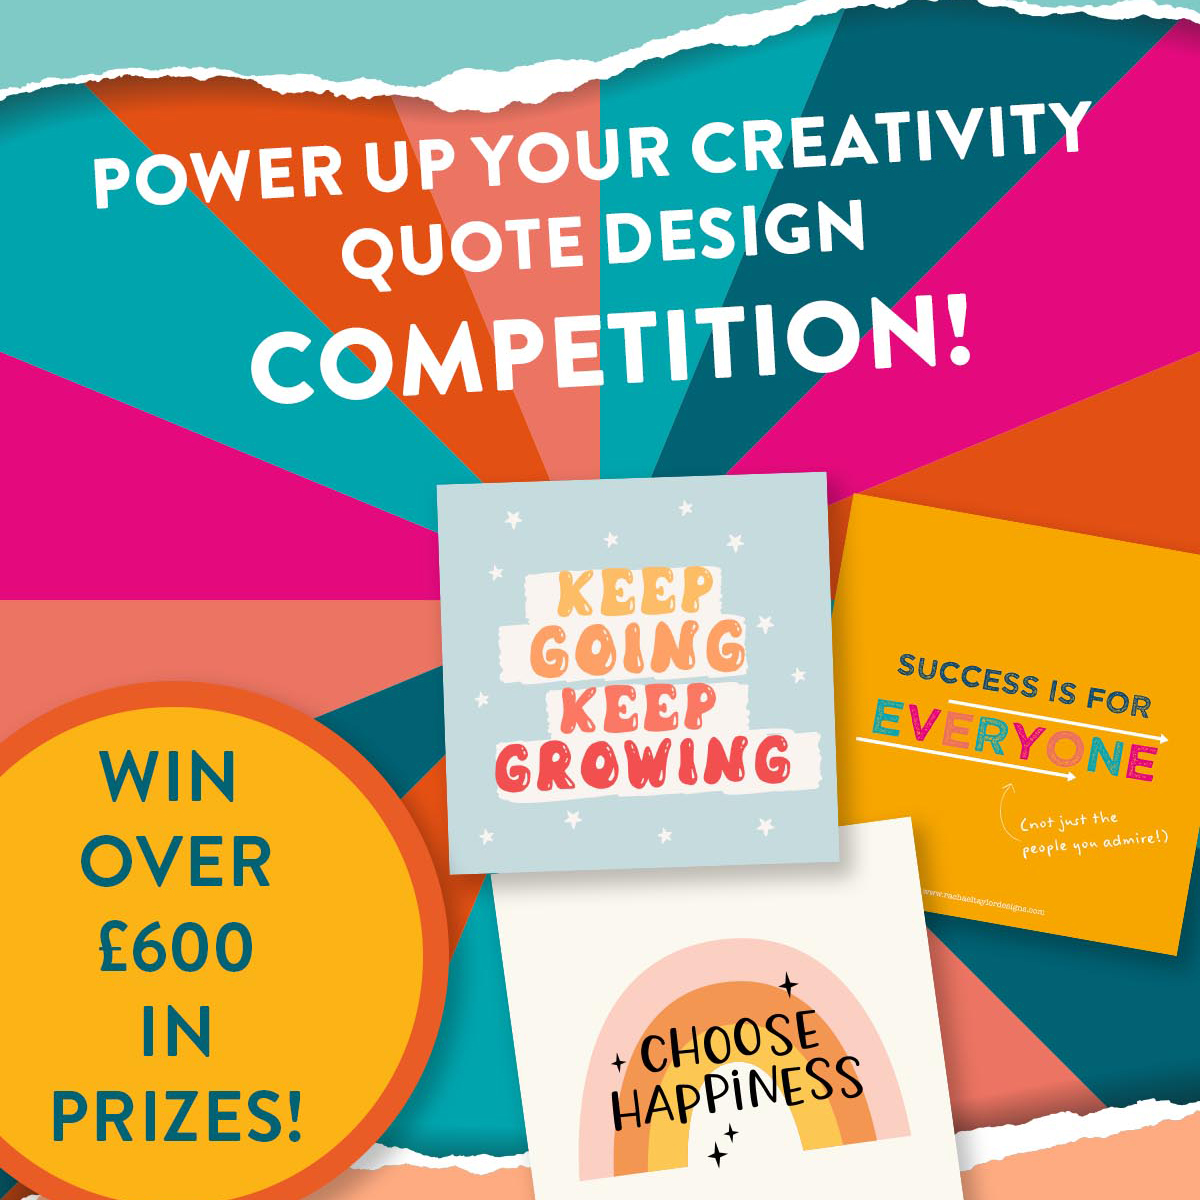 POWER UP YOUR CREATIVITY QUOTE DESIGN COMPETITION